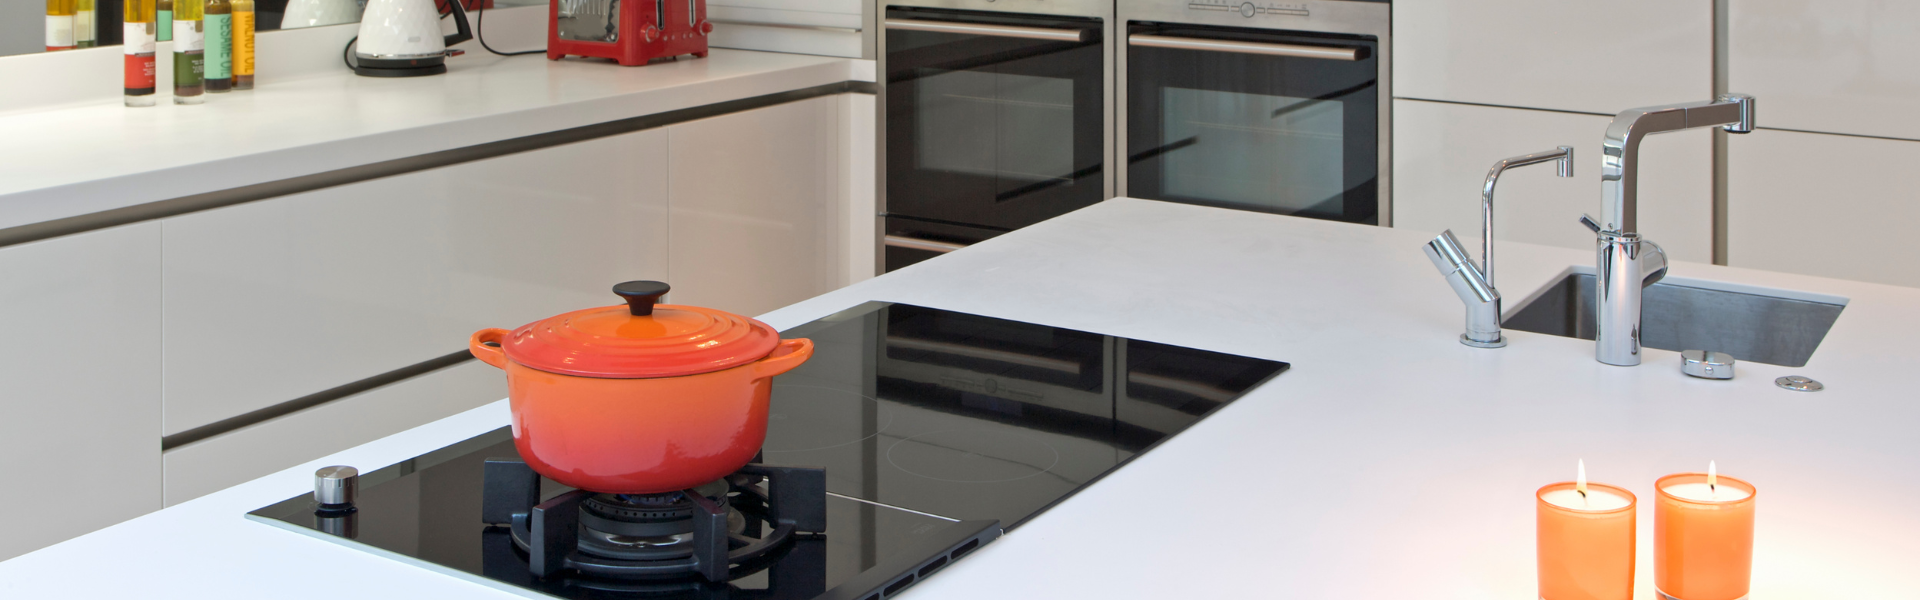 Side-by-side comparison of built-in hob and freestanding hob - helping you choose the right one for your kitchen